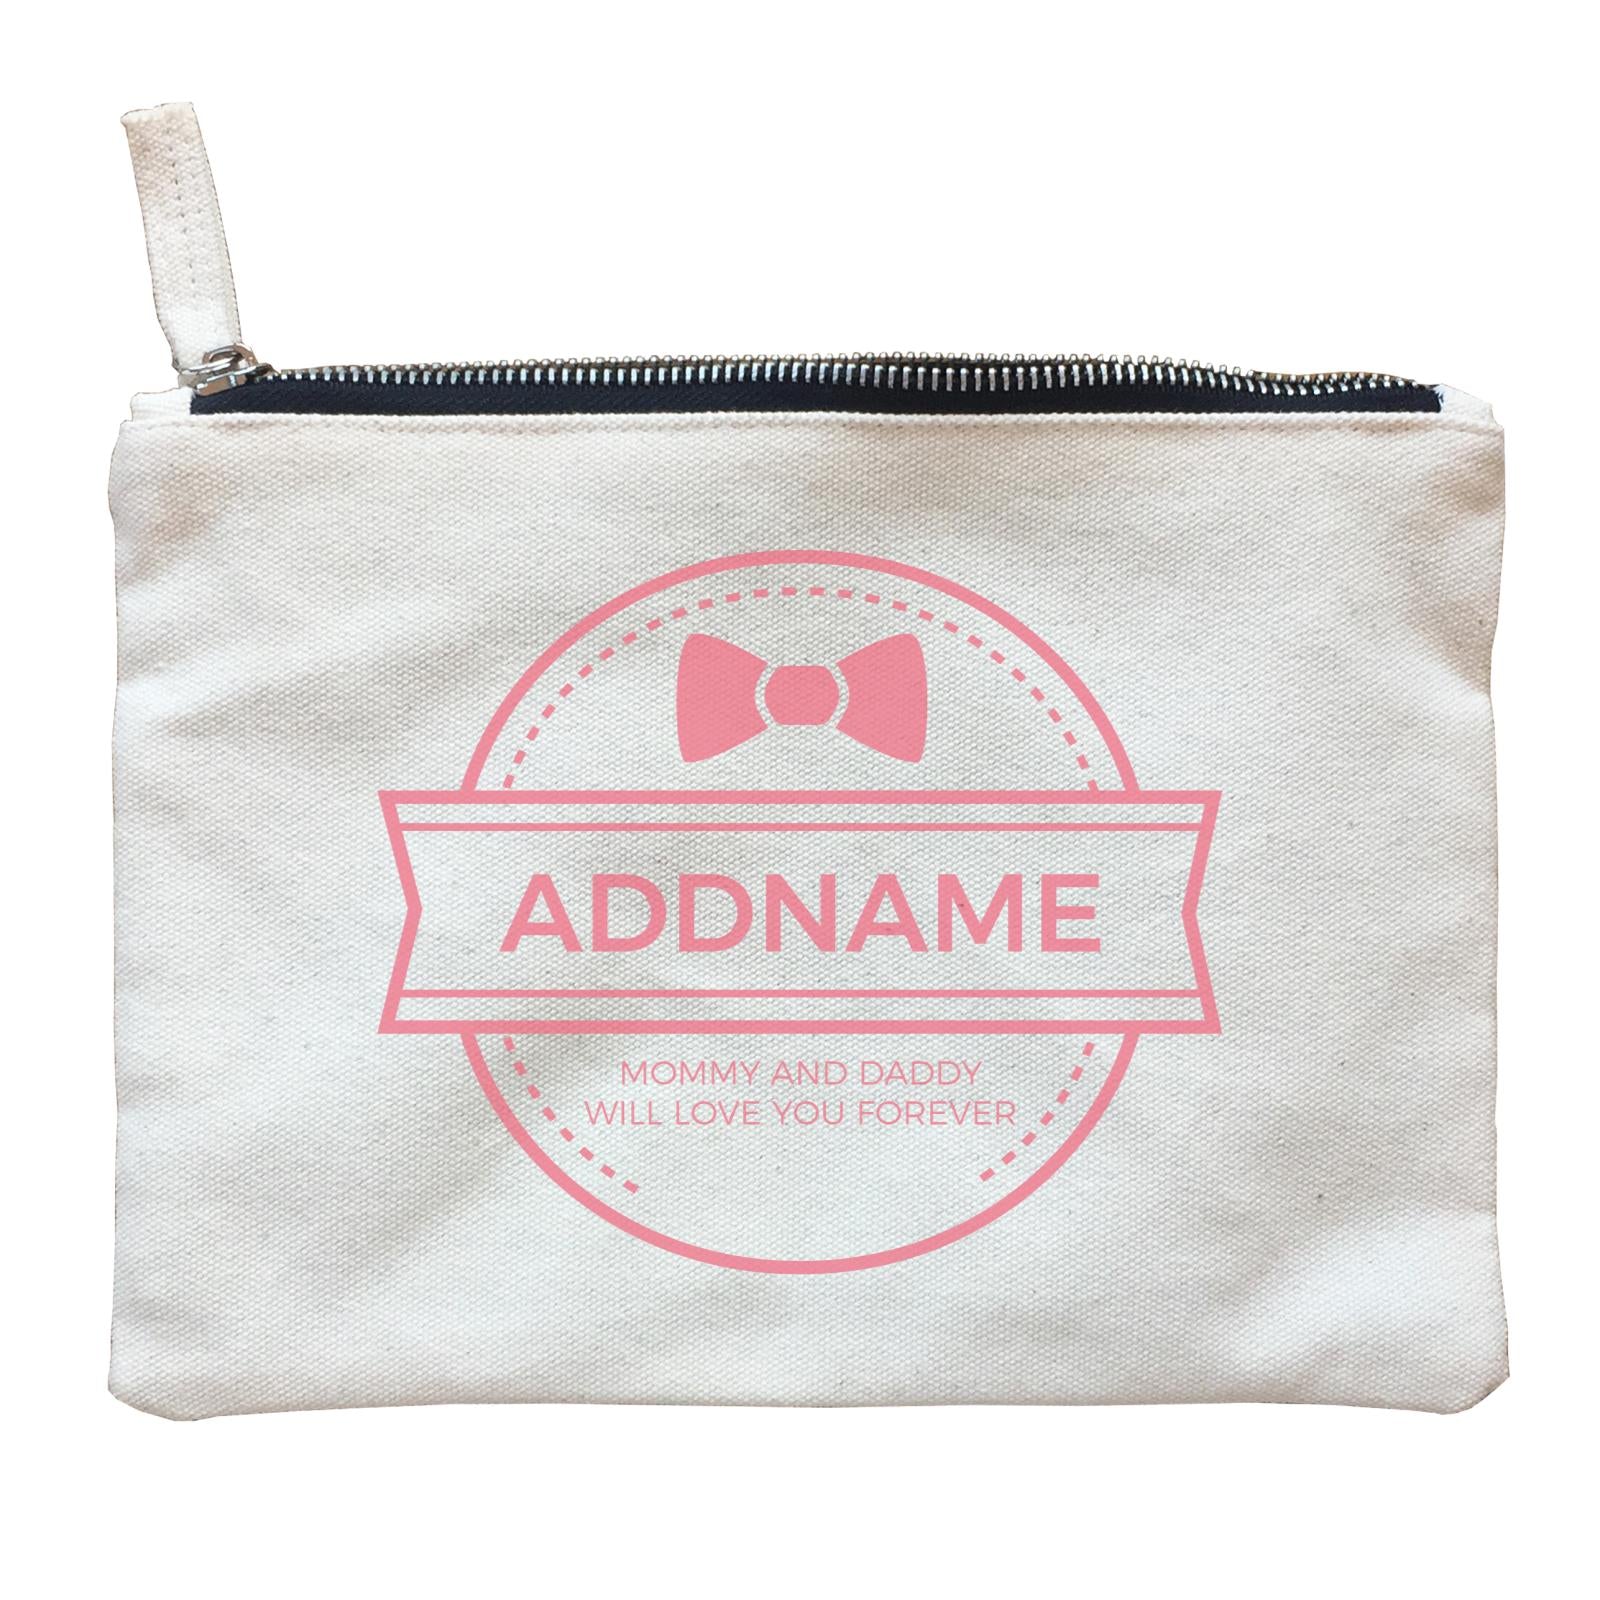 Ribbon Emblem Personalizable with Name and Text Zipper Pouch